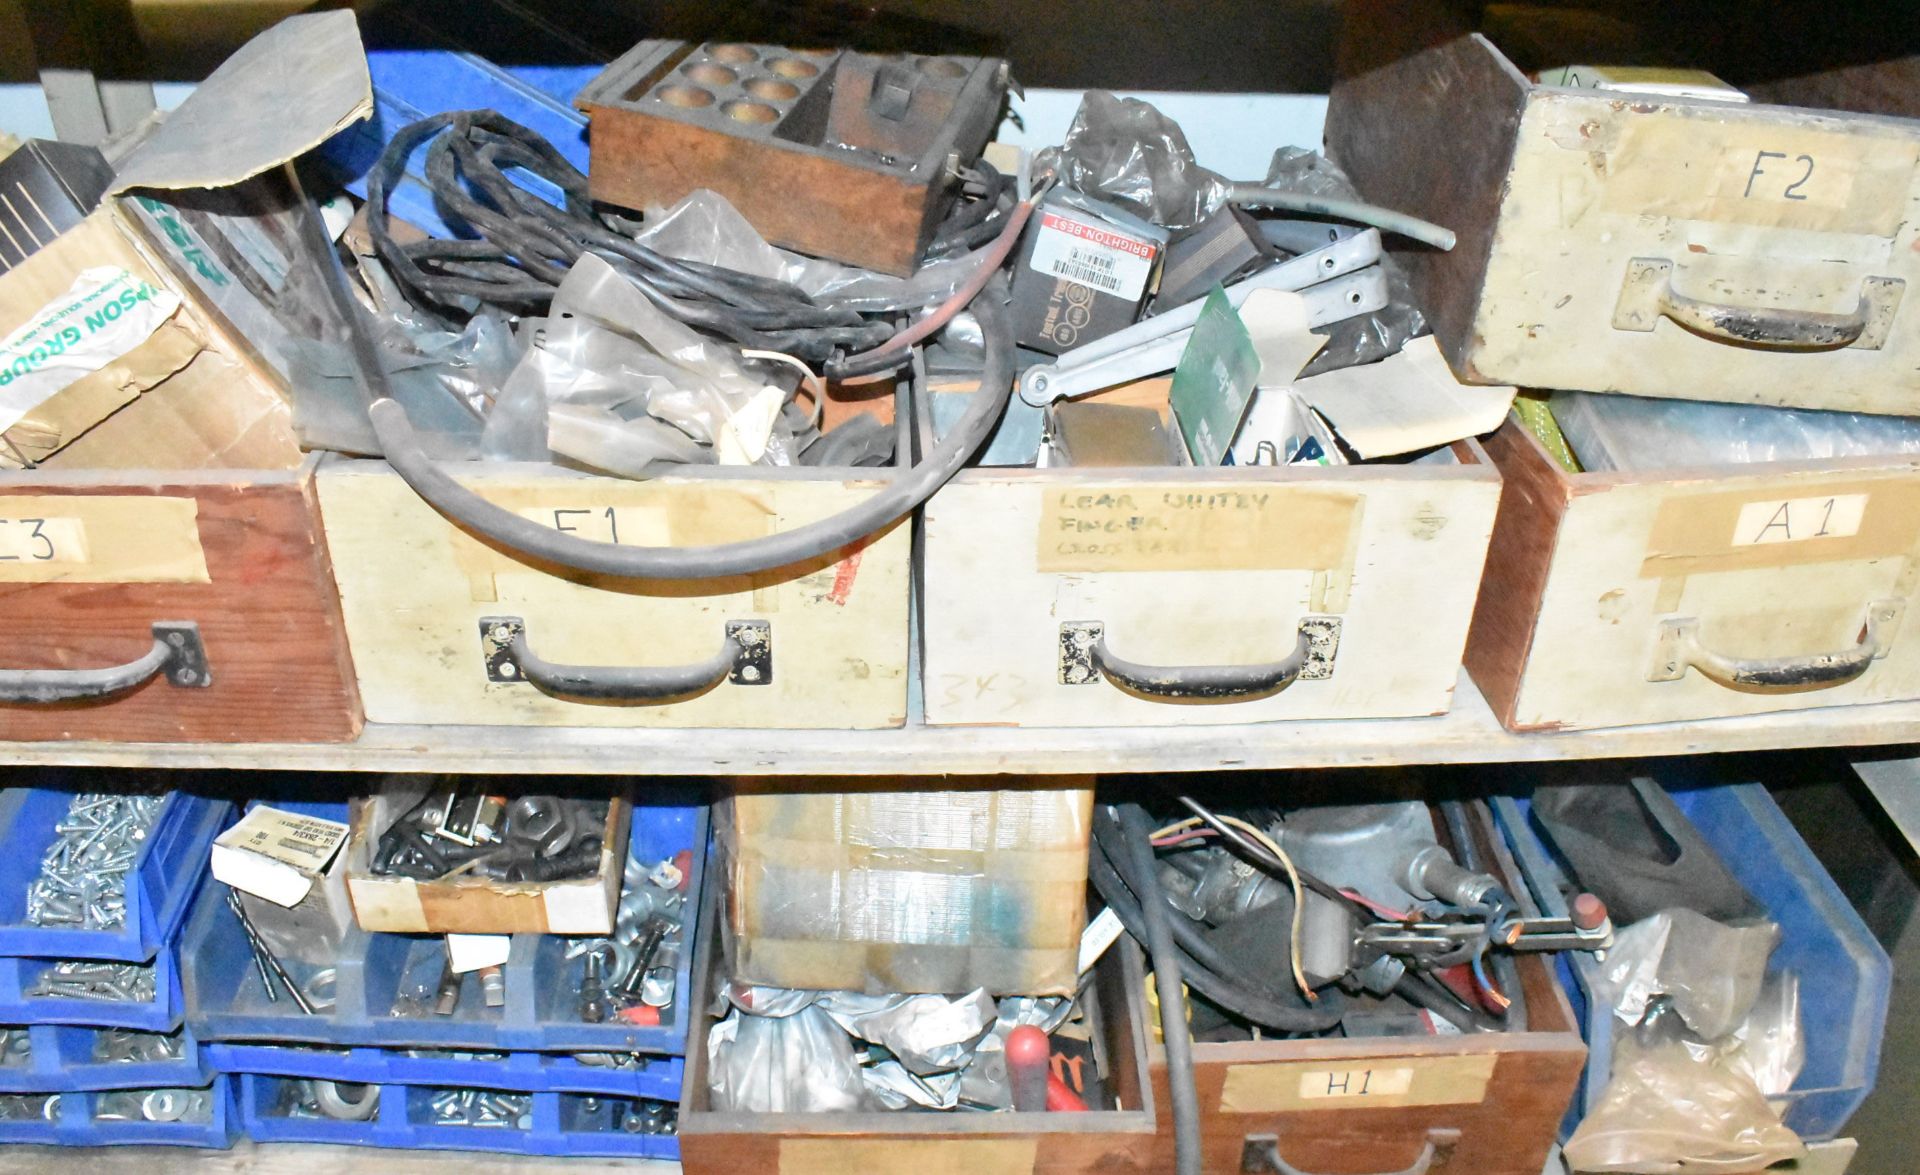 LOT/ SHELVES WITH CONTENTS - INCLUDING SPARE PARTS, SHOP SUPPLIES & HARDWARE - Image 5 of 10